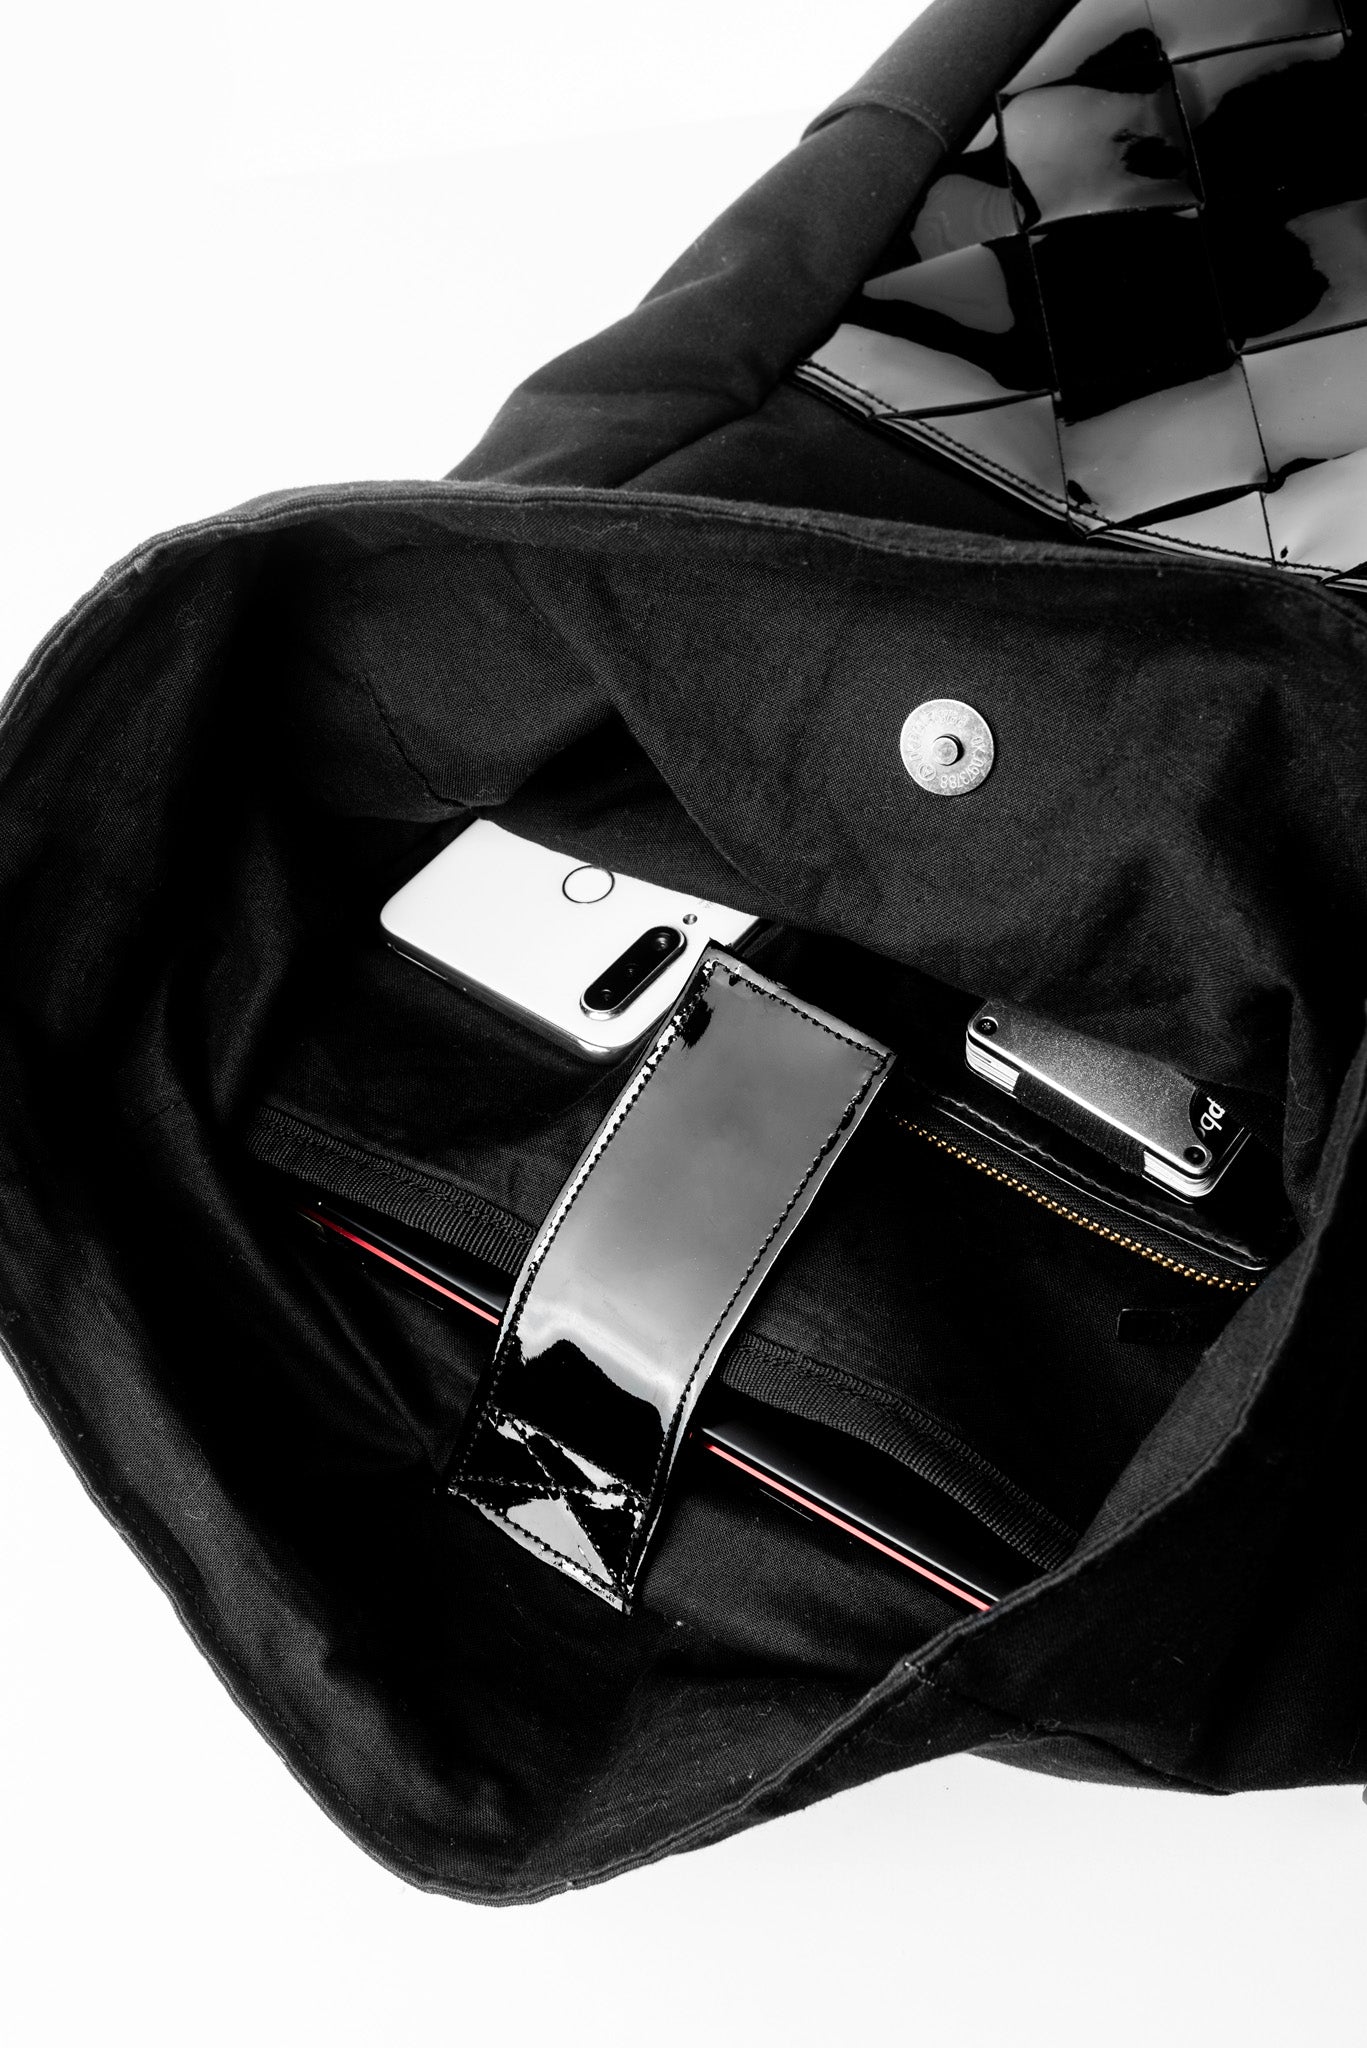 SUMMIT Roll Top Backpack-Black Patent Leather - theabags